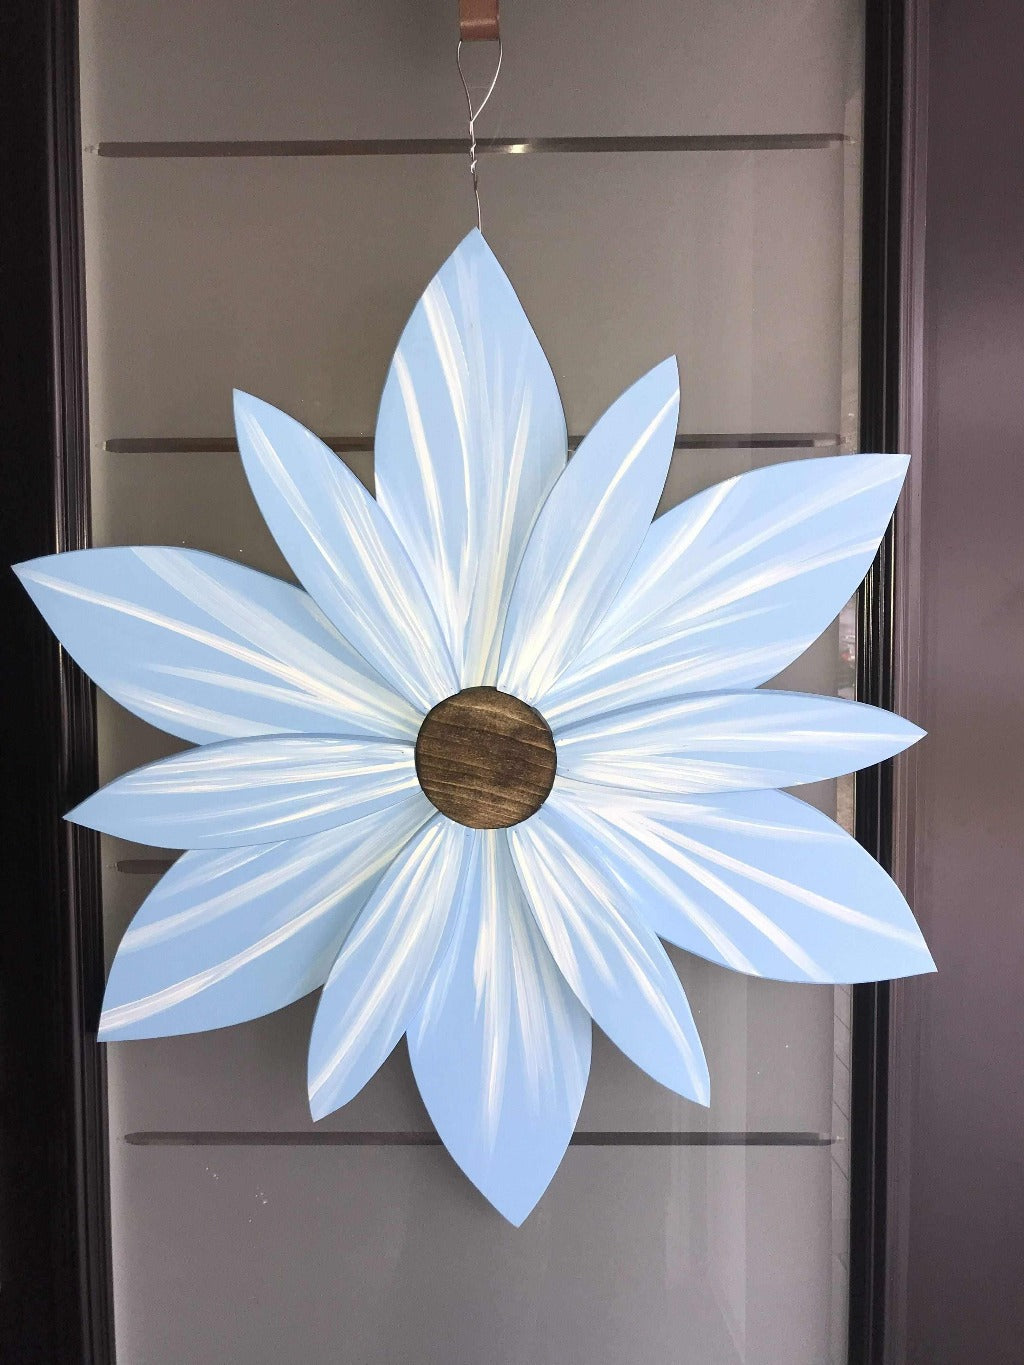 Atlantic Wood N Wares Home & Garden>Home Décor>Wall Decor>Wall Hangings Medium 26 x 26 inches What is a Costa Rica Blue Wood Flower and How to Get One for Your Door SFCB001